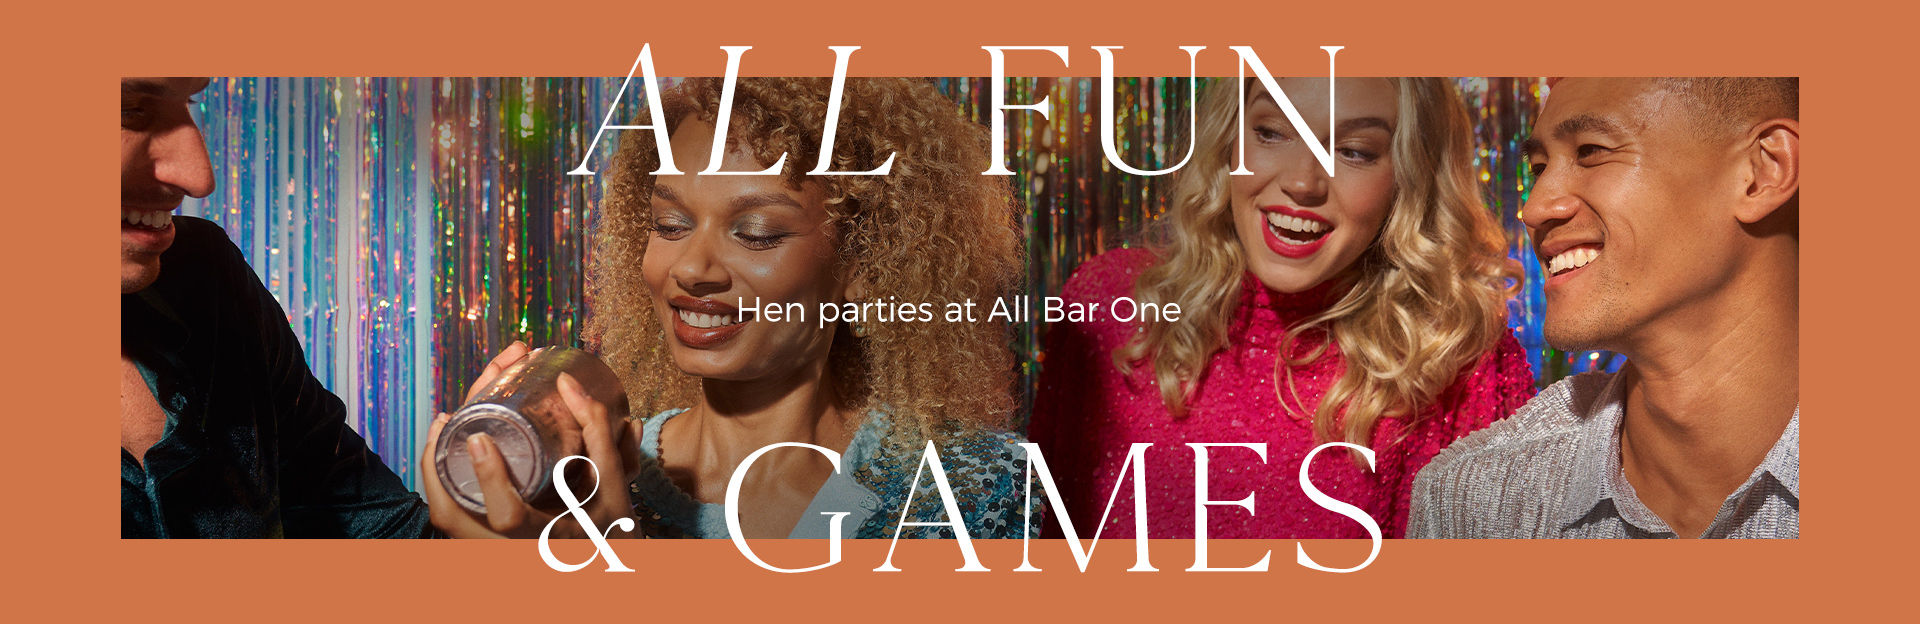 Hen parties at All Bar One Butlers Wharf